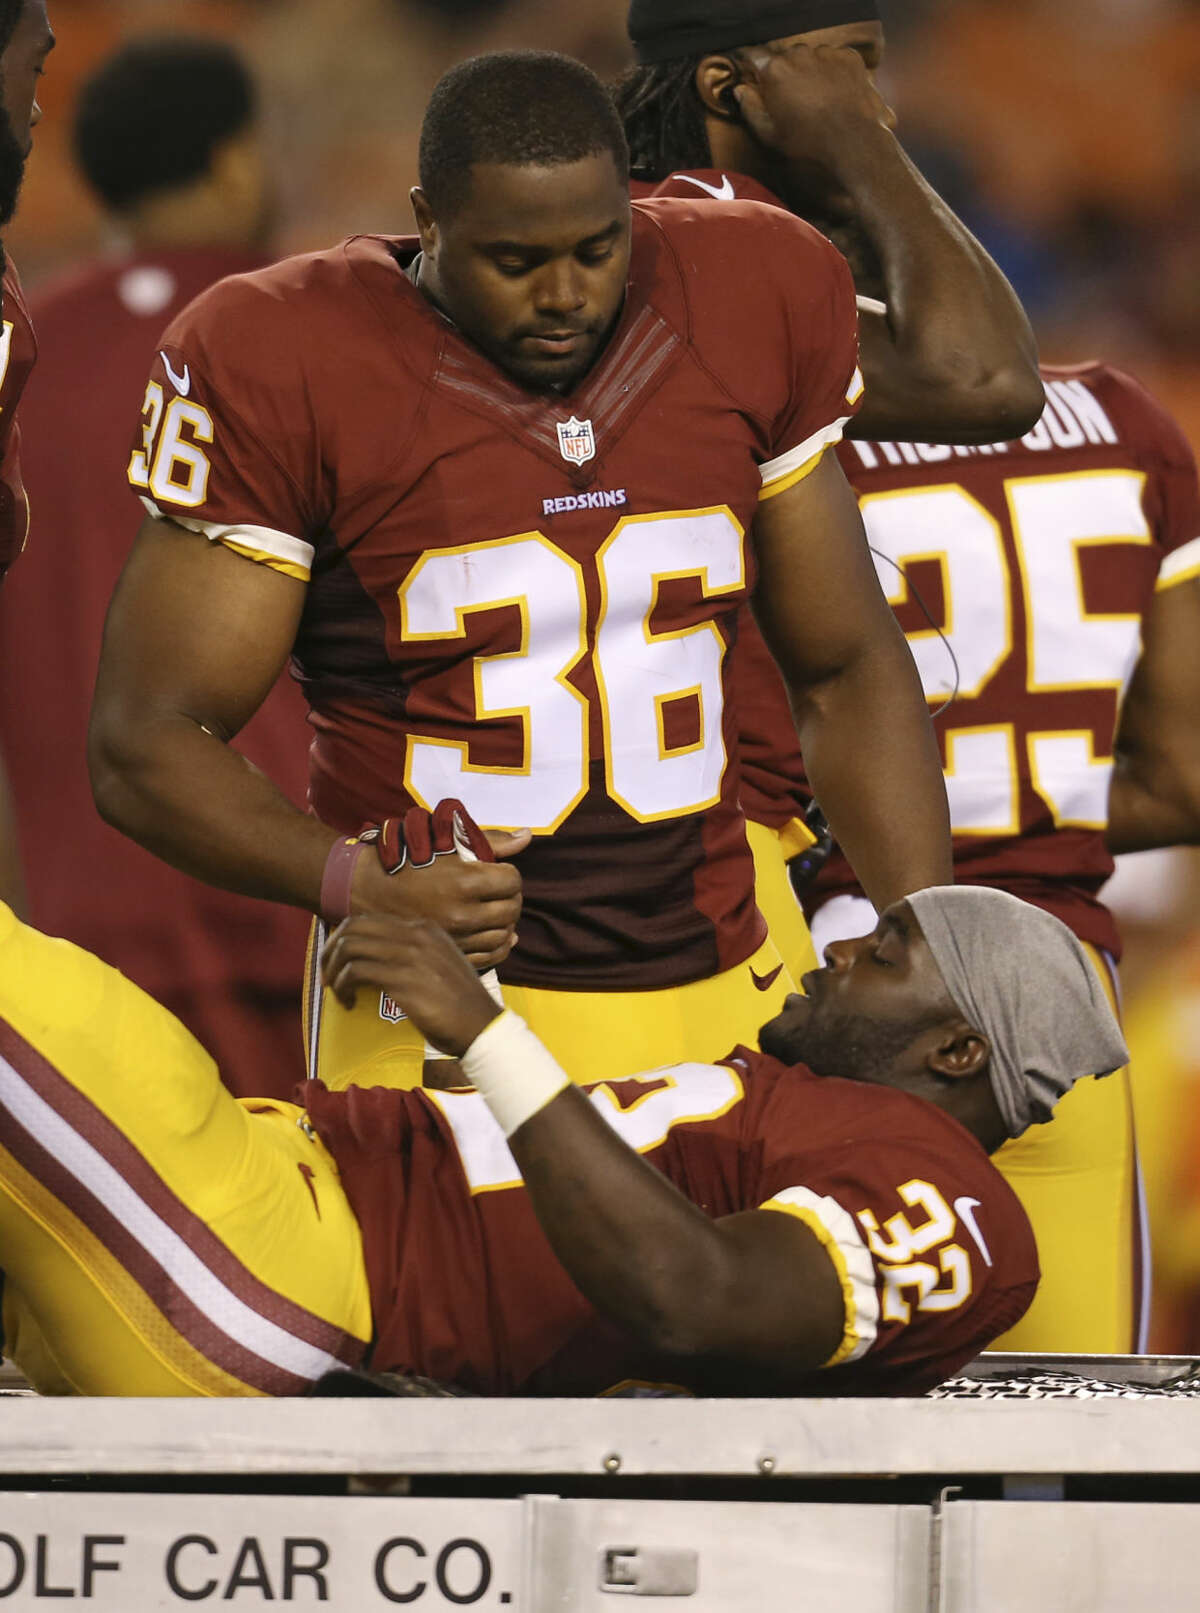 Washington Redskins running back Silas Redd Jr. (32) is consoled by defensive back Tanard Jackson (36) after Redd was injured in the third quarter of an NFL preseason football game against the Cleveland Browns, Thursday, Aug. 13, 2015, in Cleveland. (AP Photo/Ron Schwane)